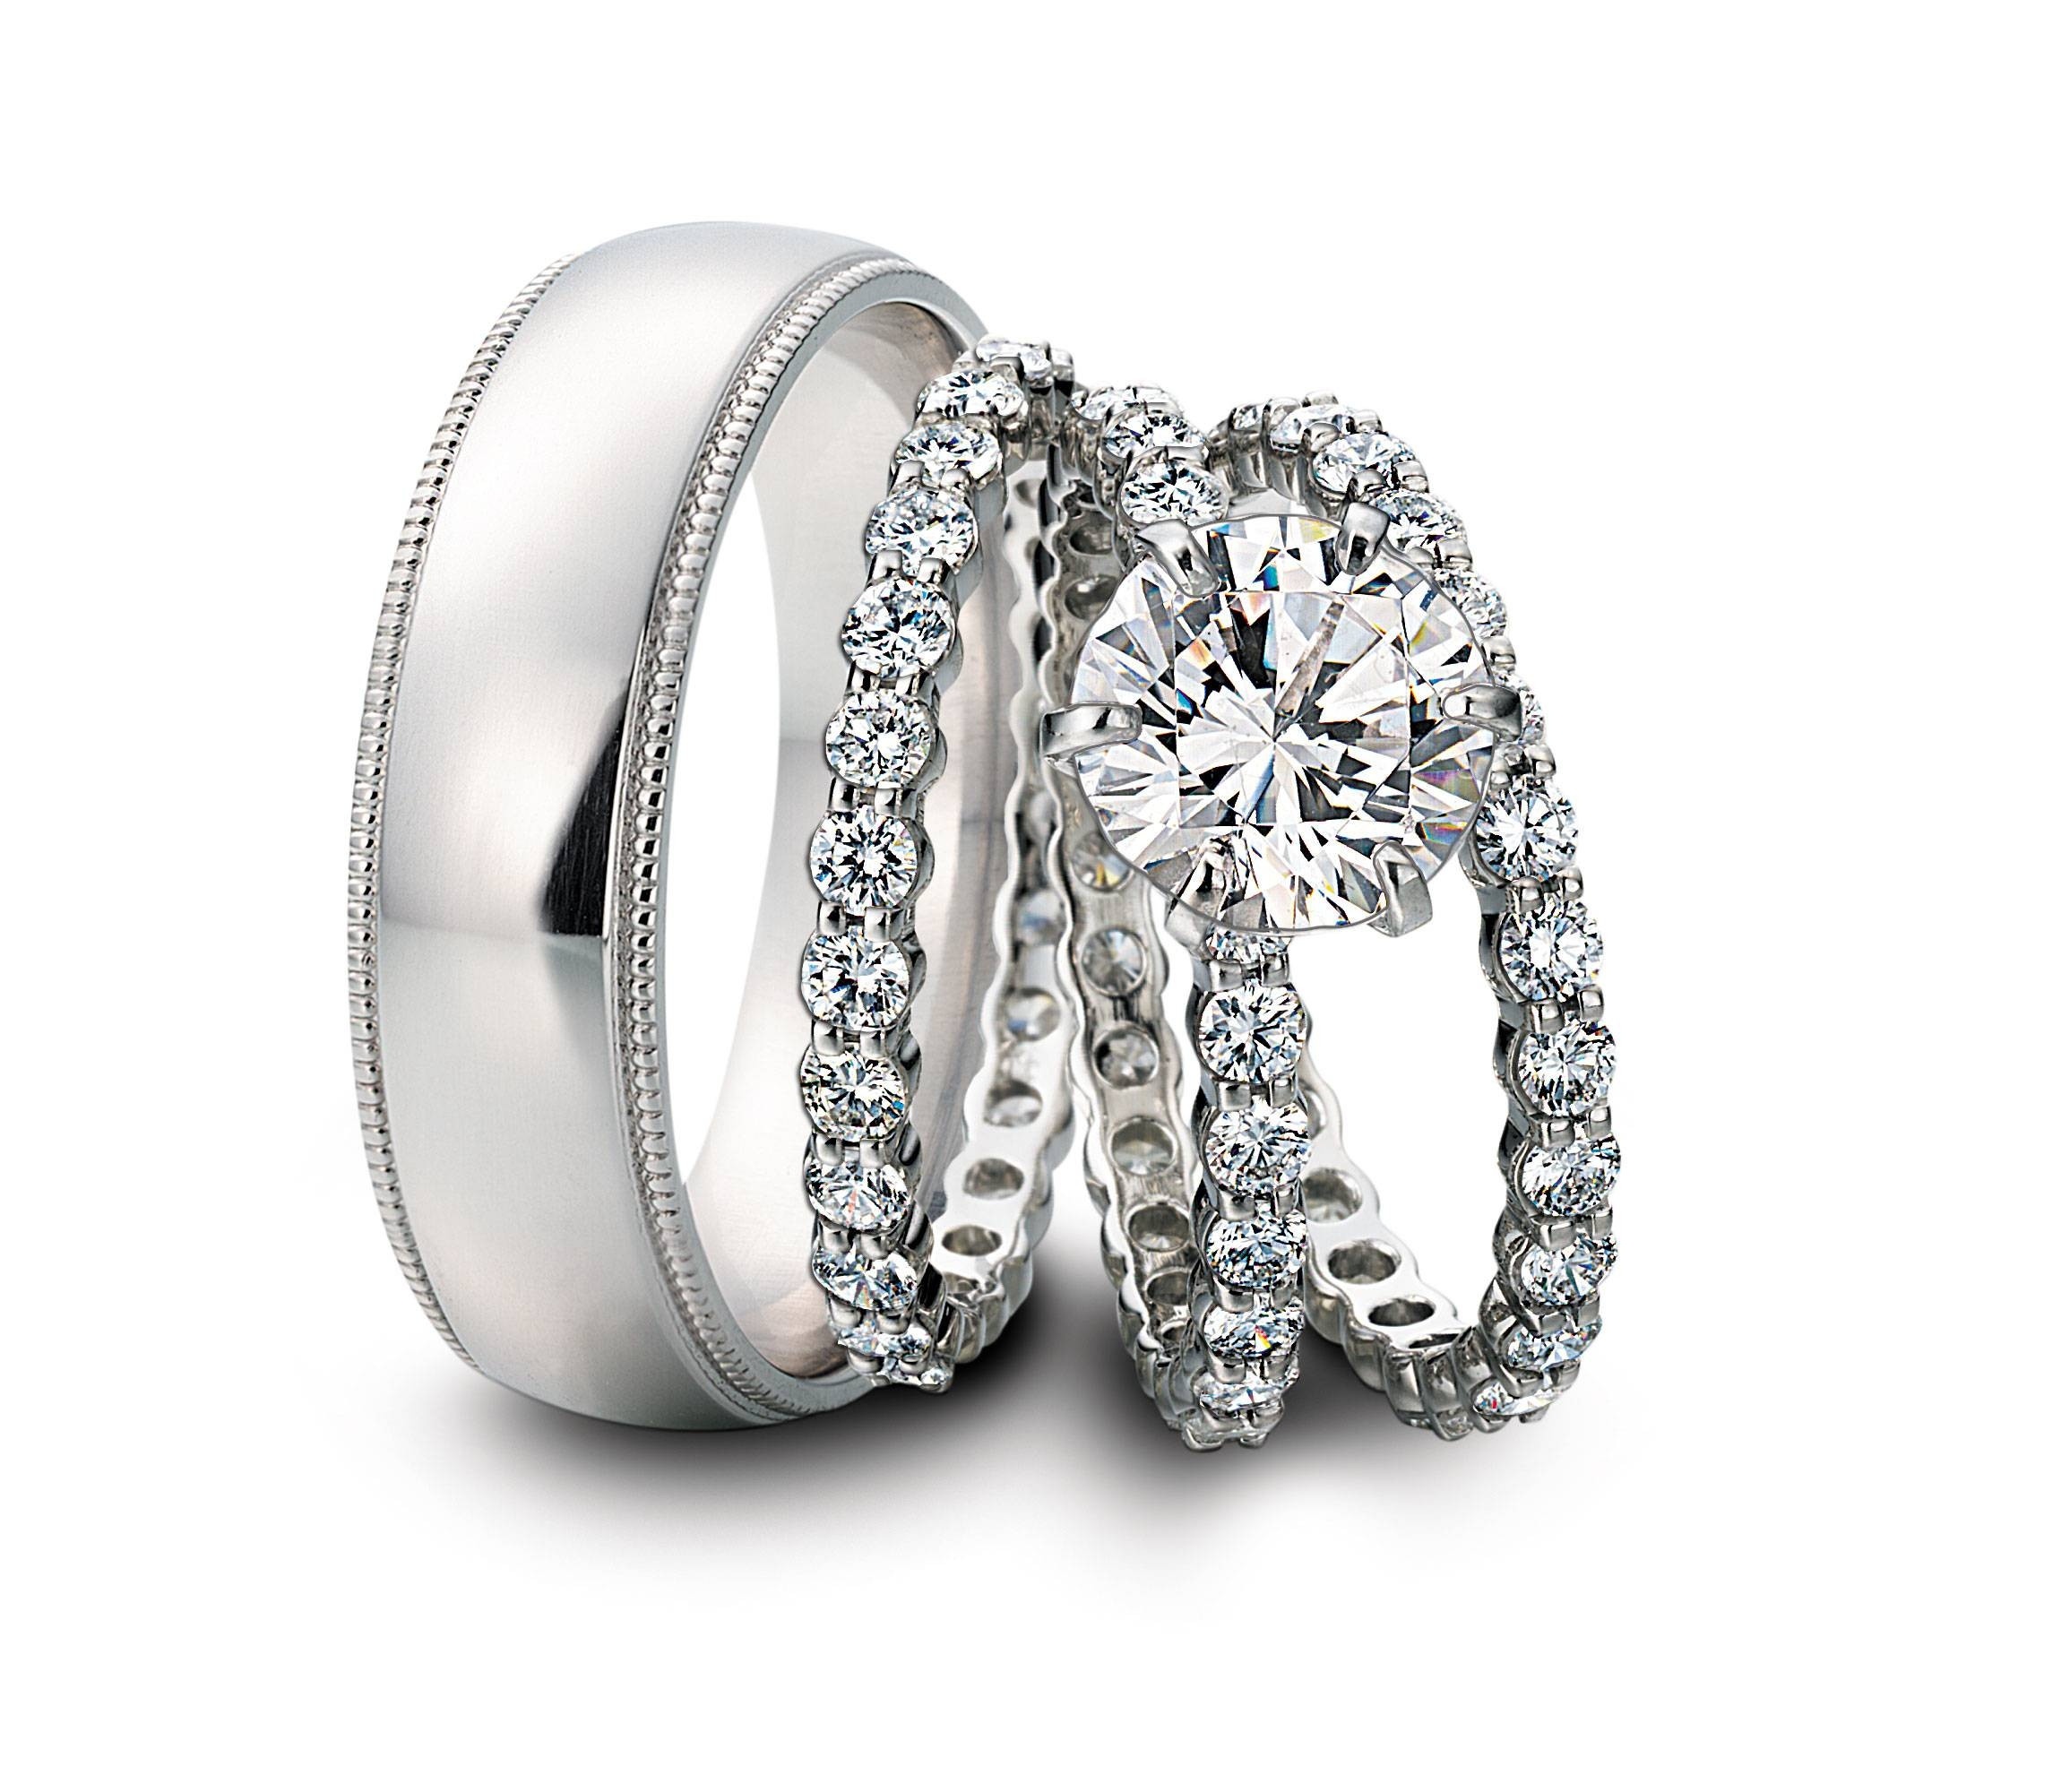 Wedding Rings Cheap
 15 Inspirations of Cheap Wedding Bands Sets His And Hers